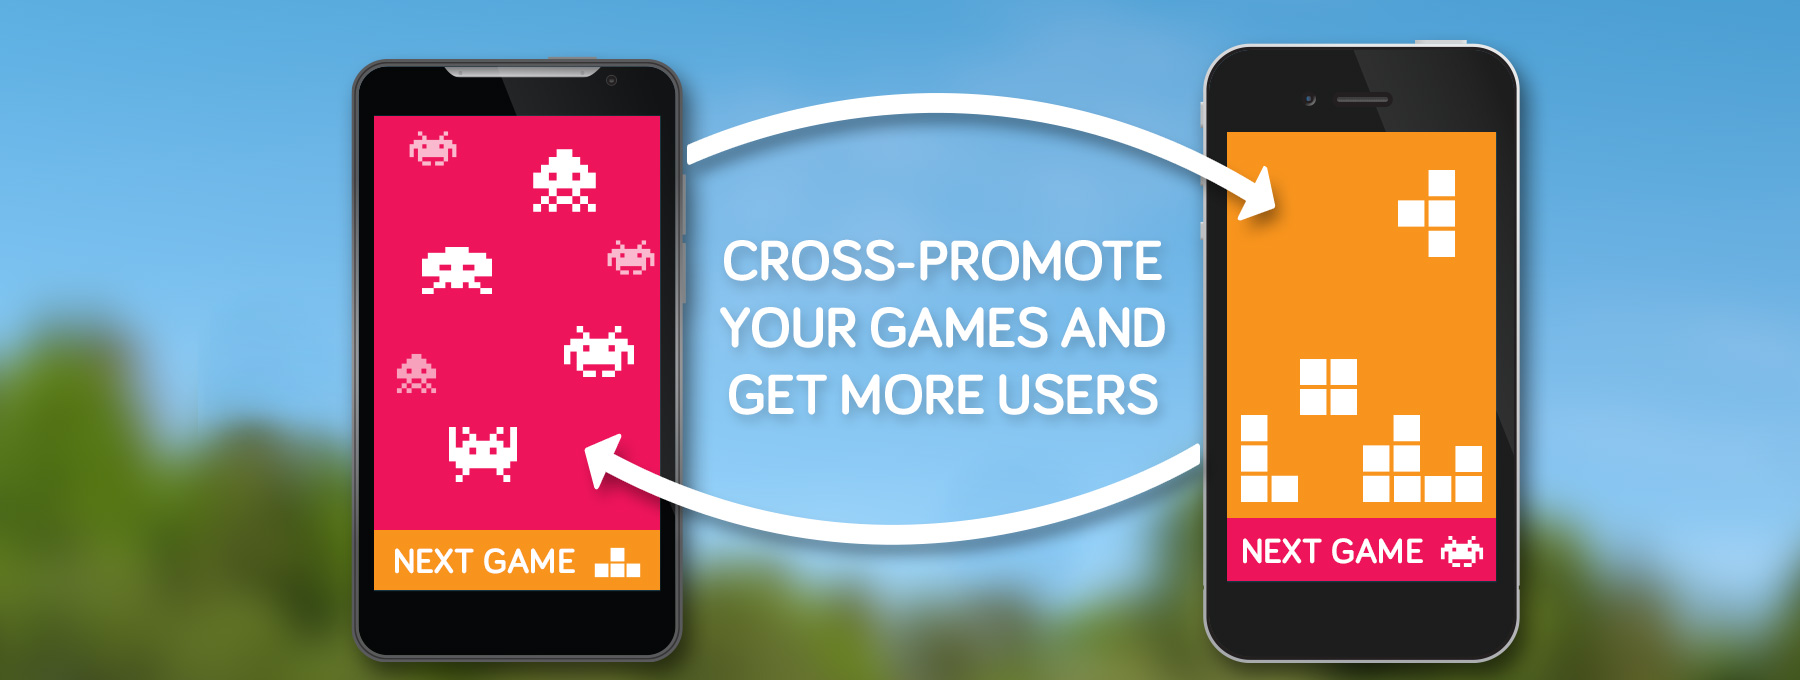 Cross promote your games and get more users.